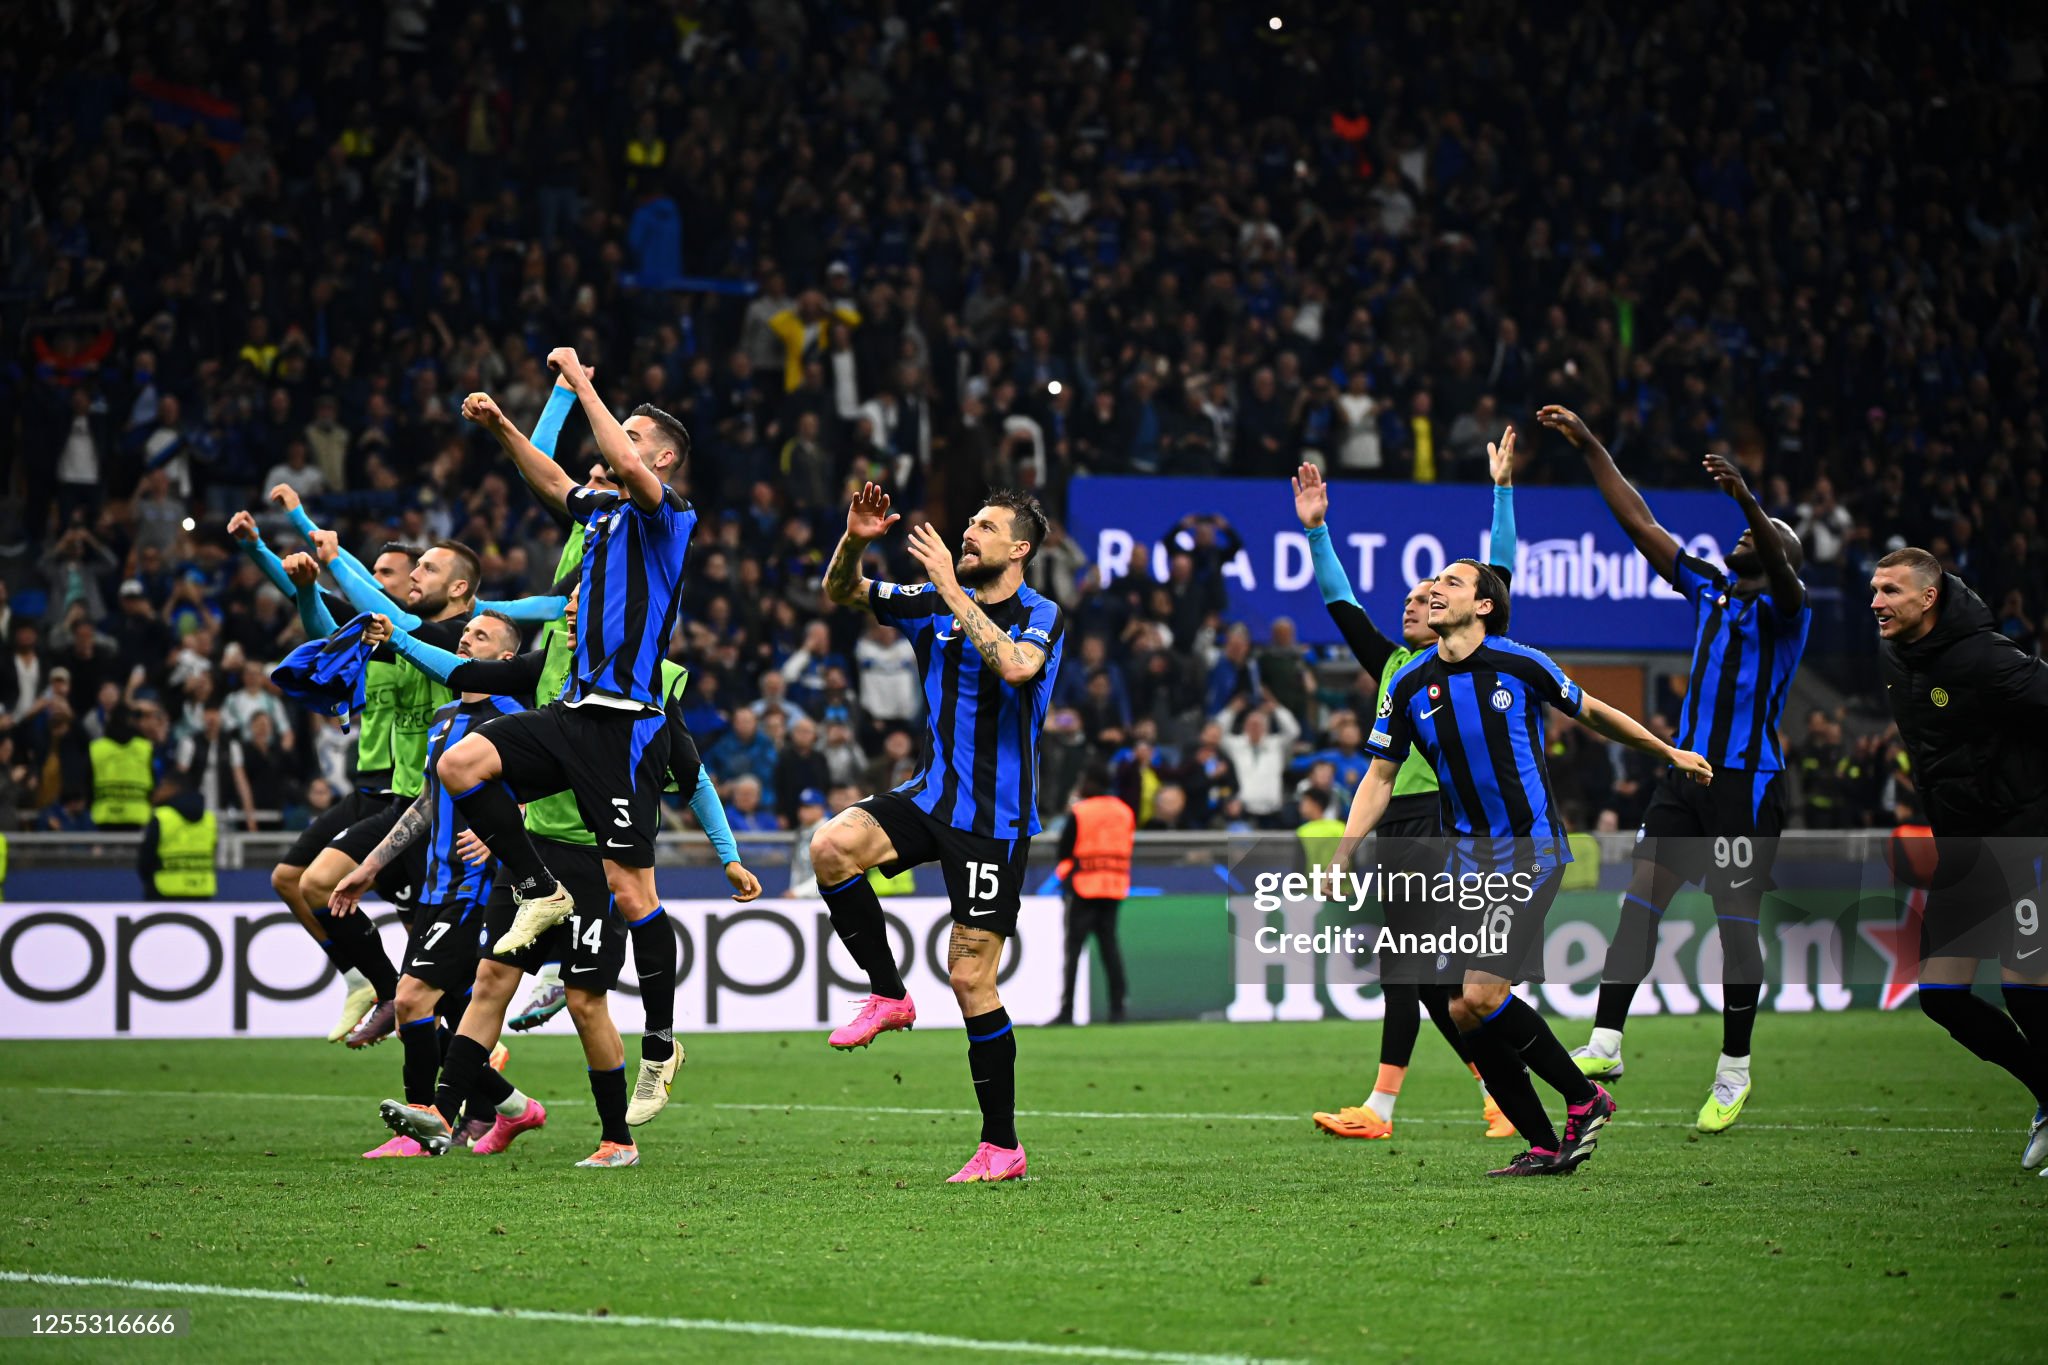 Inter reaches the Champions League final for the first time in thirteen years